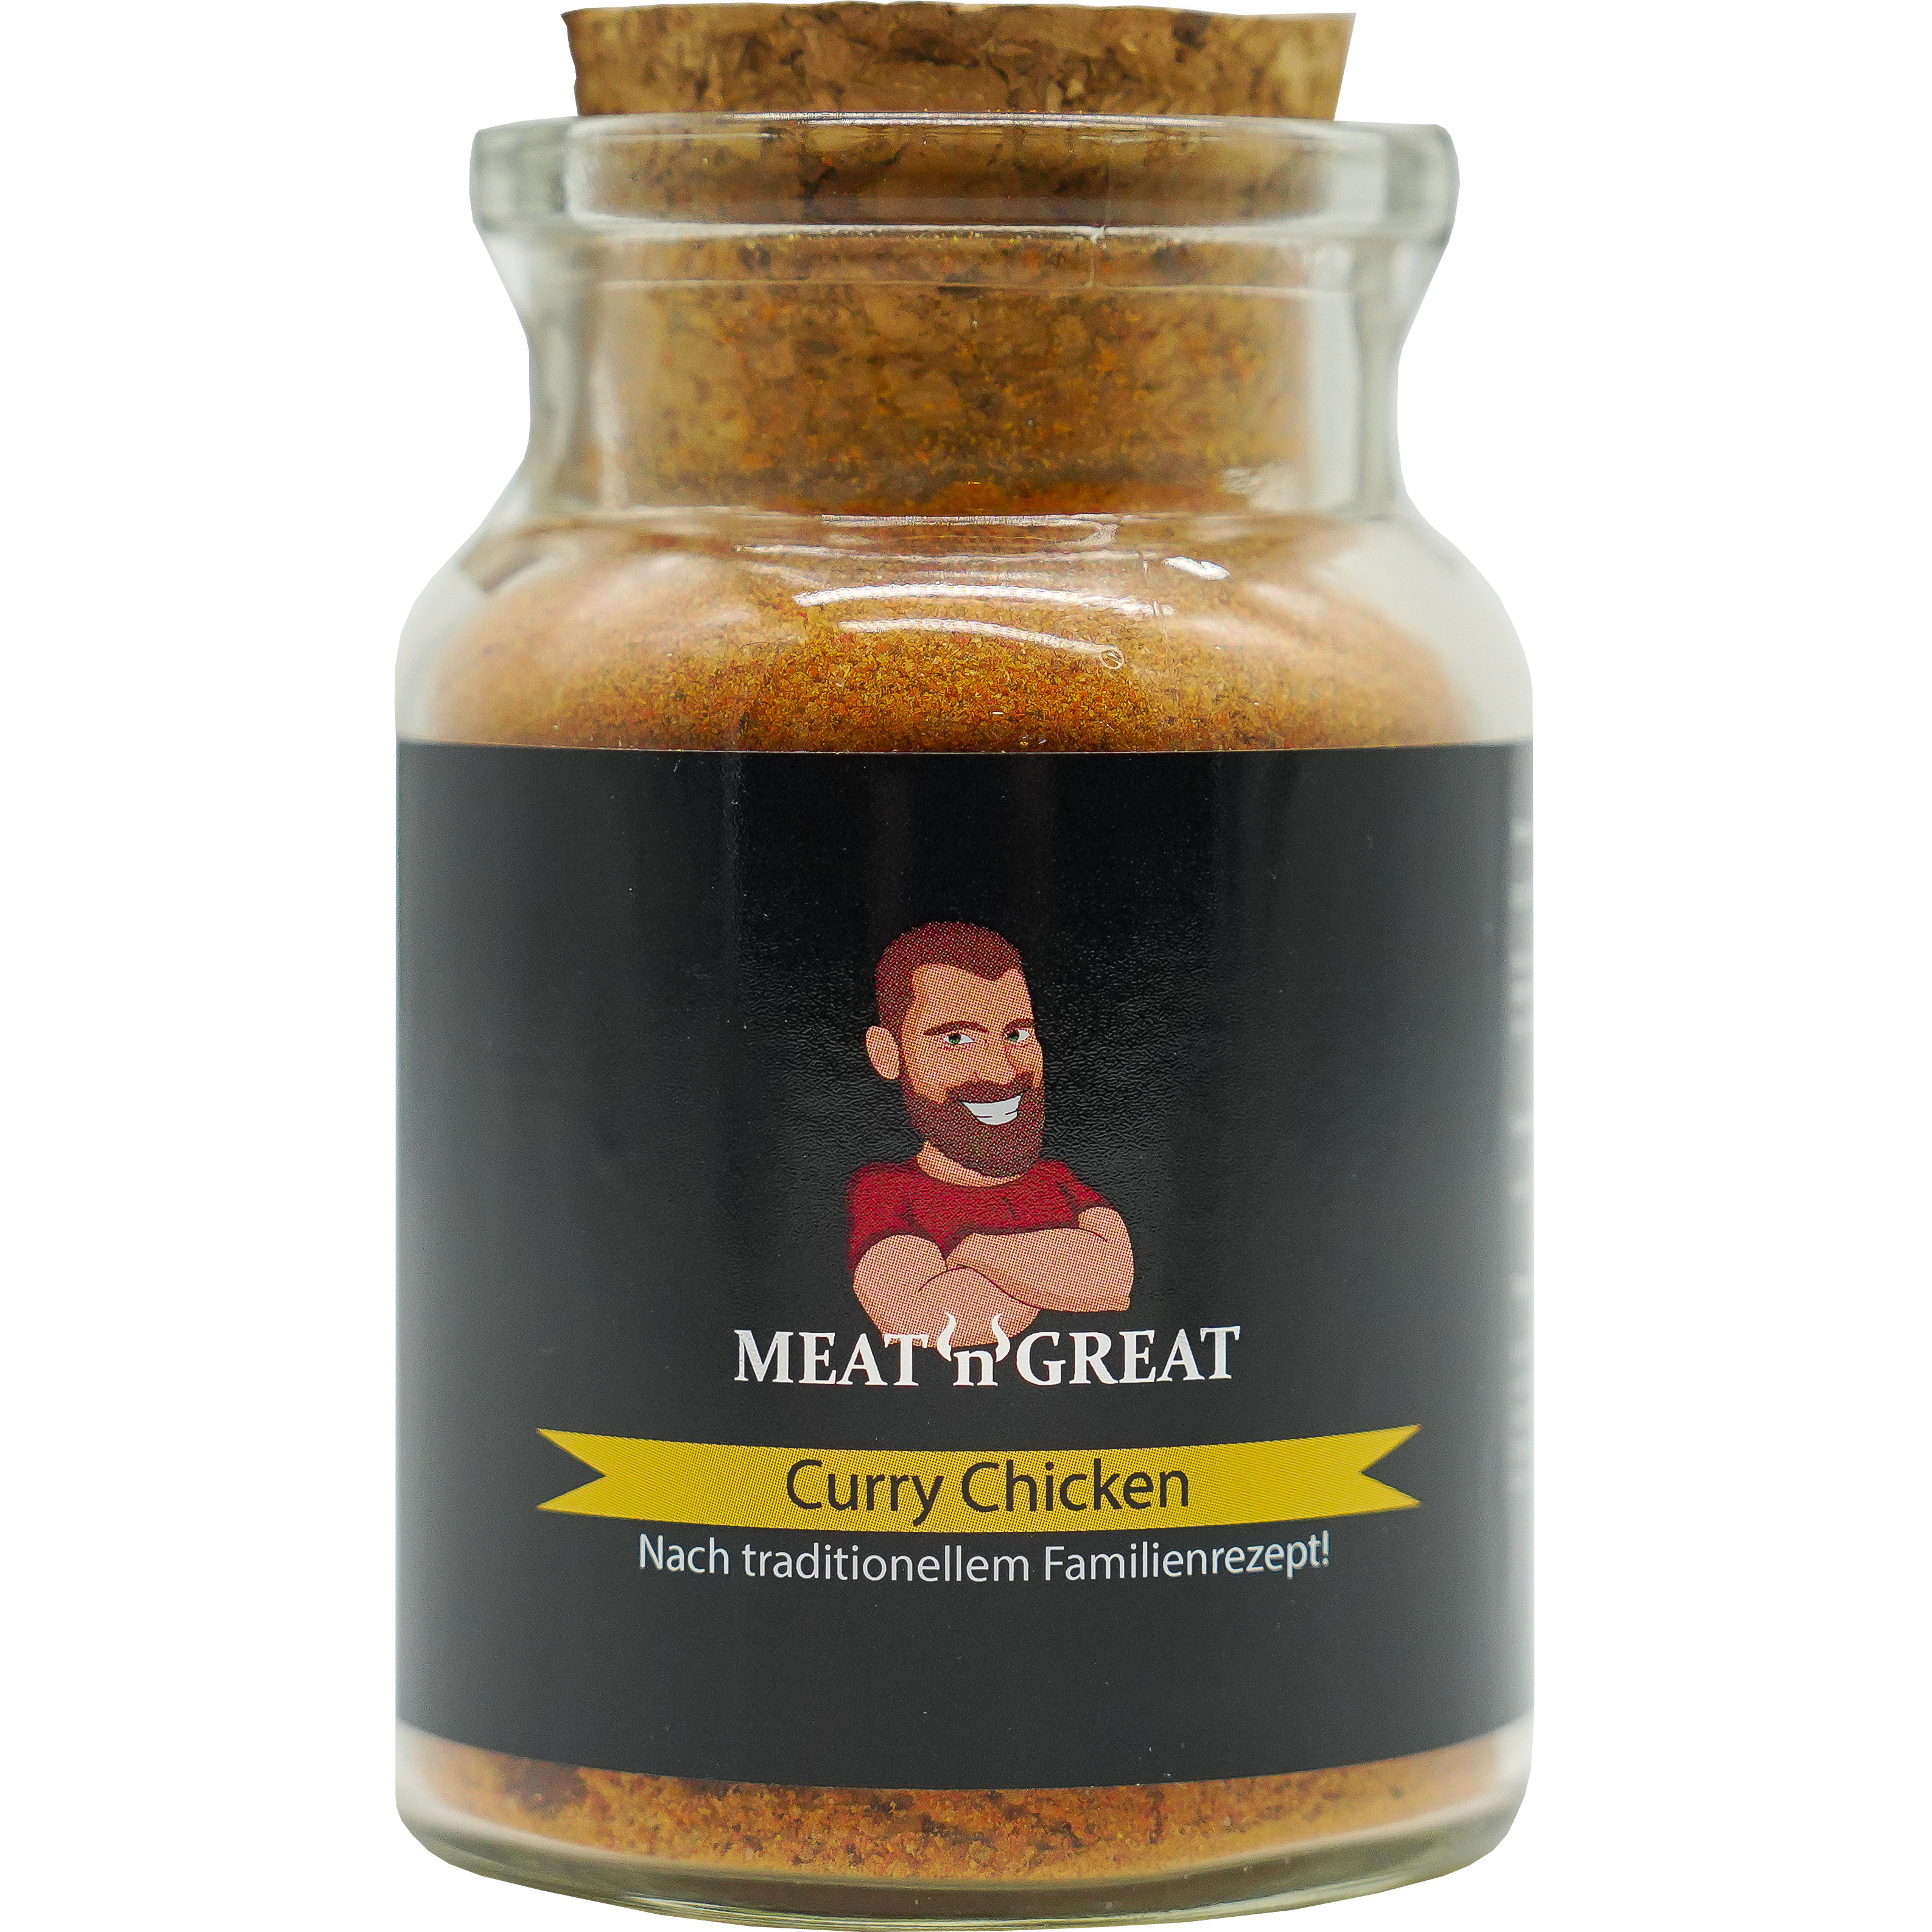 Meat 'n' Great Curry Chicken, 100g